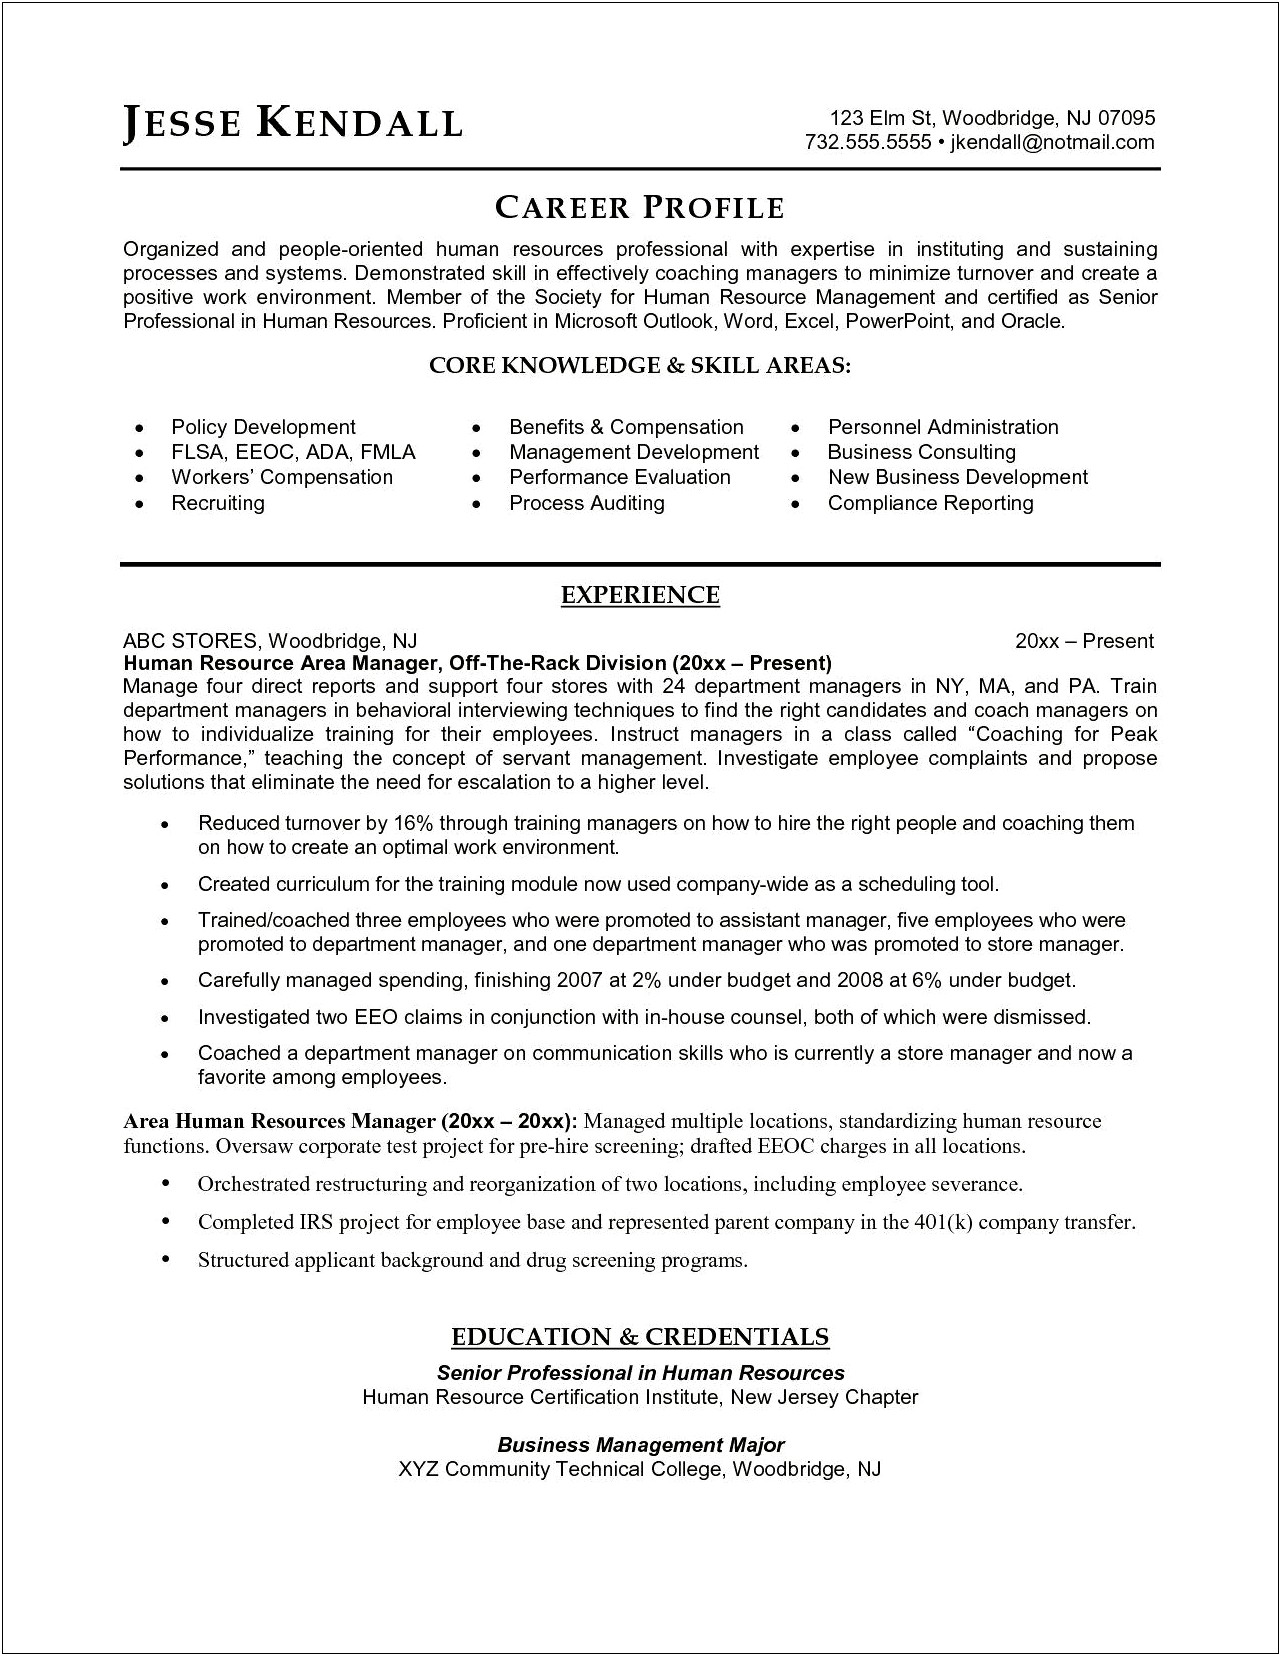 Human Resources Manager Resume Skills